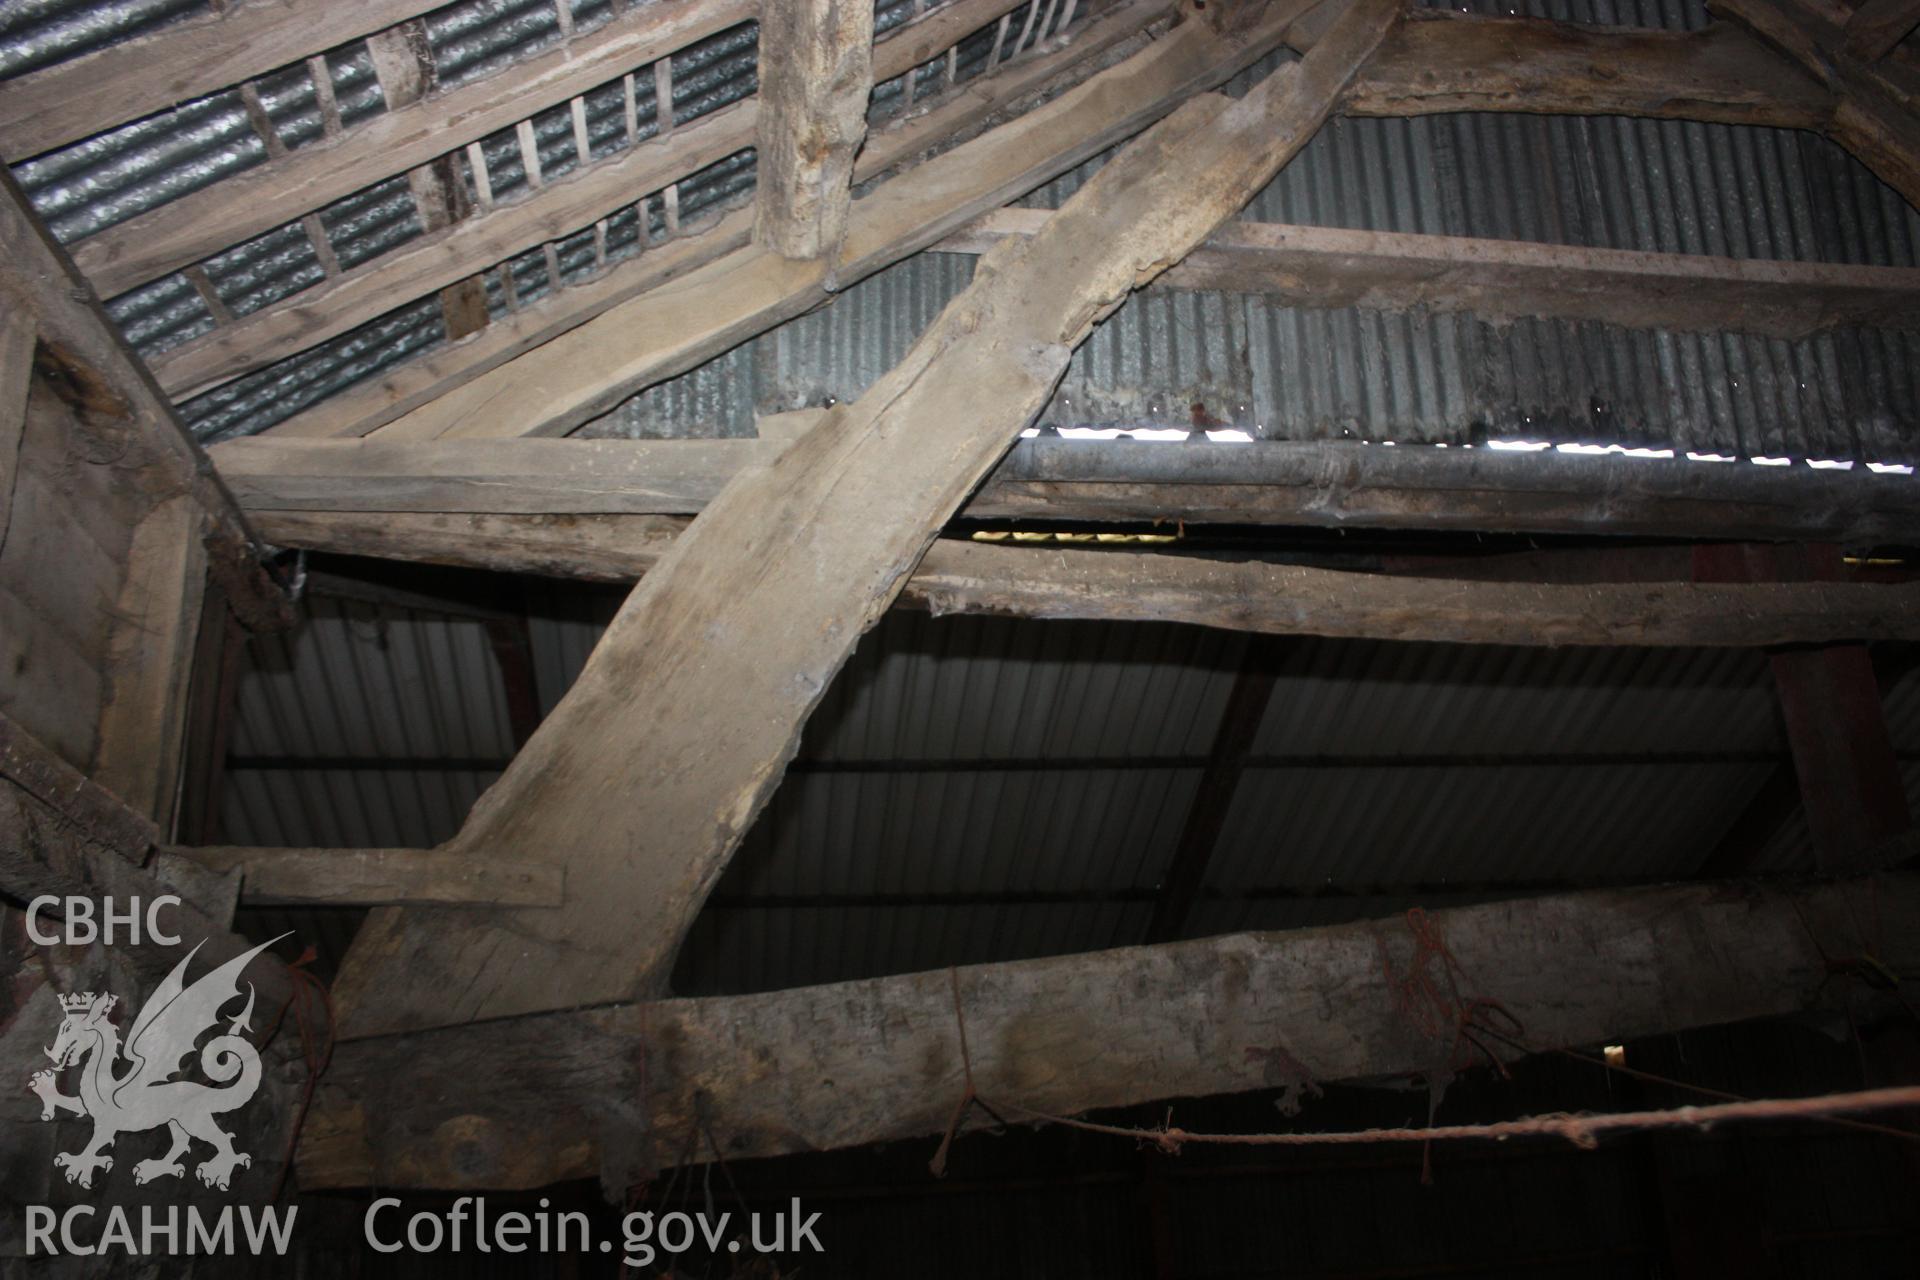 Interior view of shed or barn showing timber frame and roof beams, and a corrugated iron roof. Photographic survey of Glanhafon-Fawr Farmstead conducted by Geoff Ward on 4th November 2010.